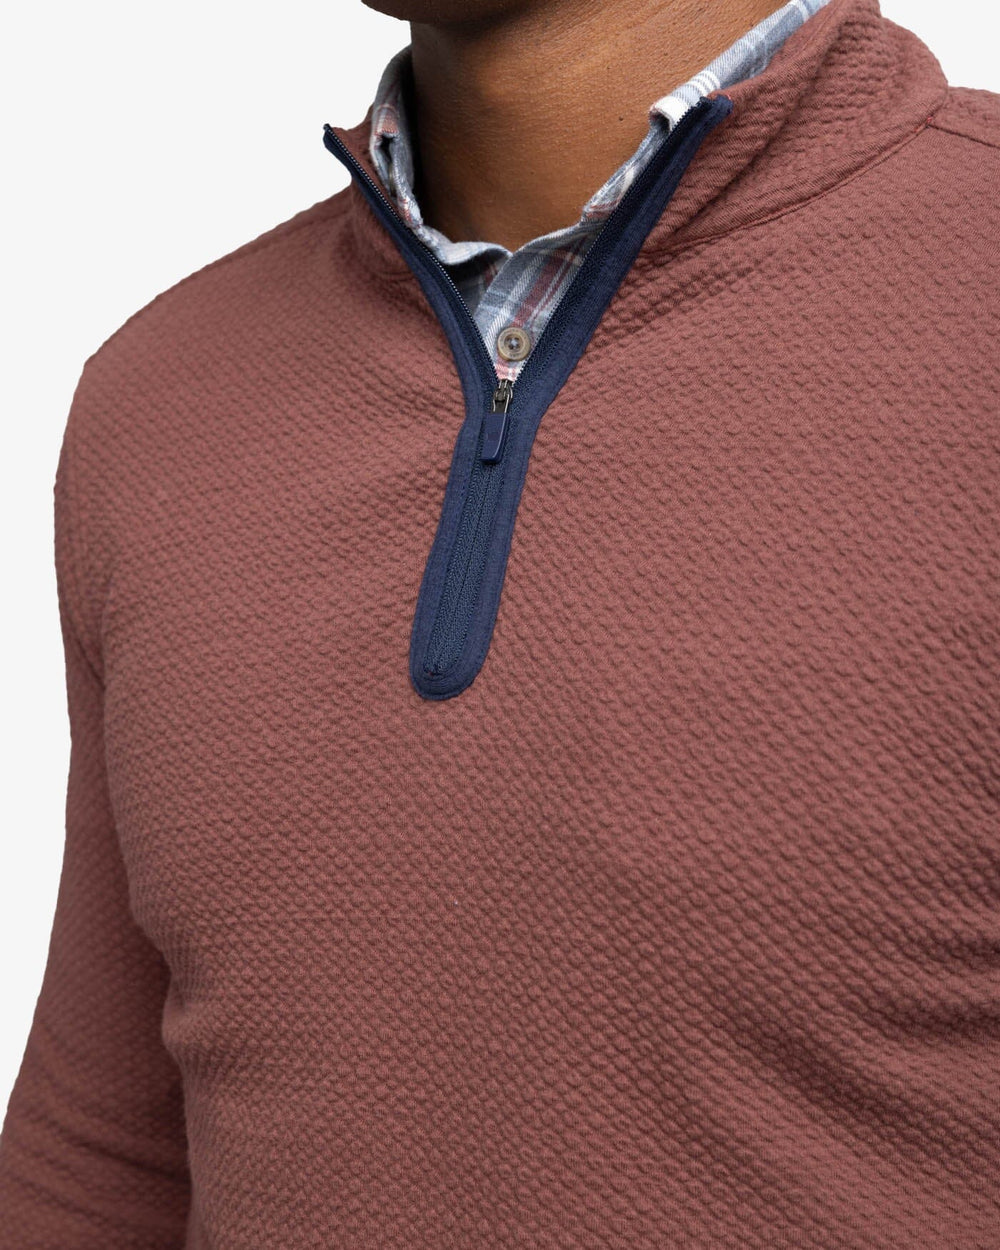 The detail view of the Southern Tide Heather Outbound Quarter Zip by Southern Tide - Heather Bordeaux Red